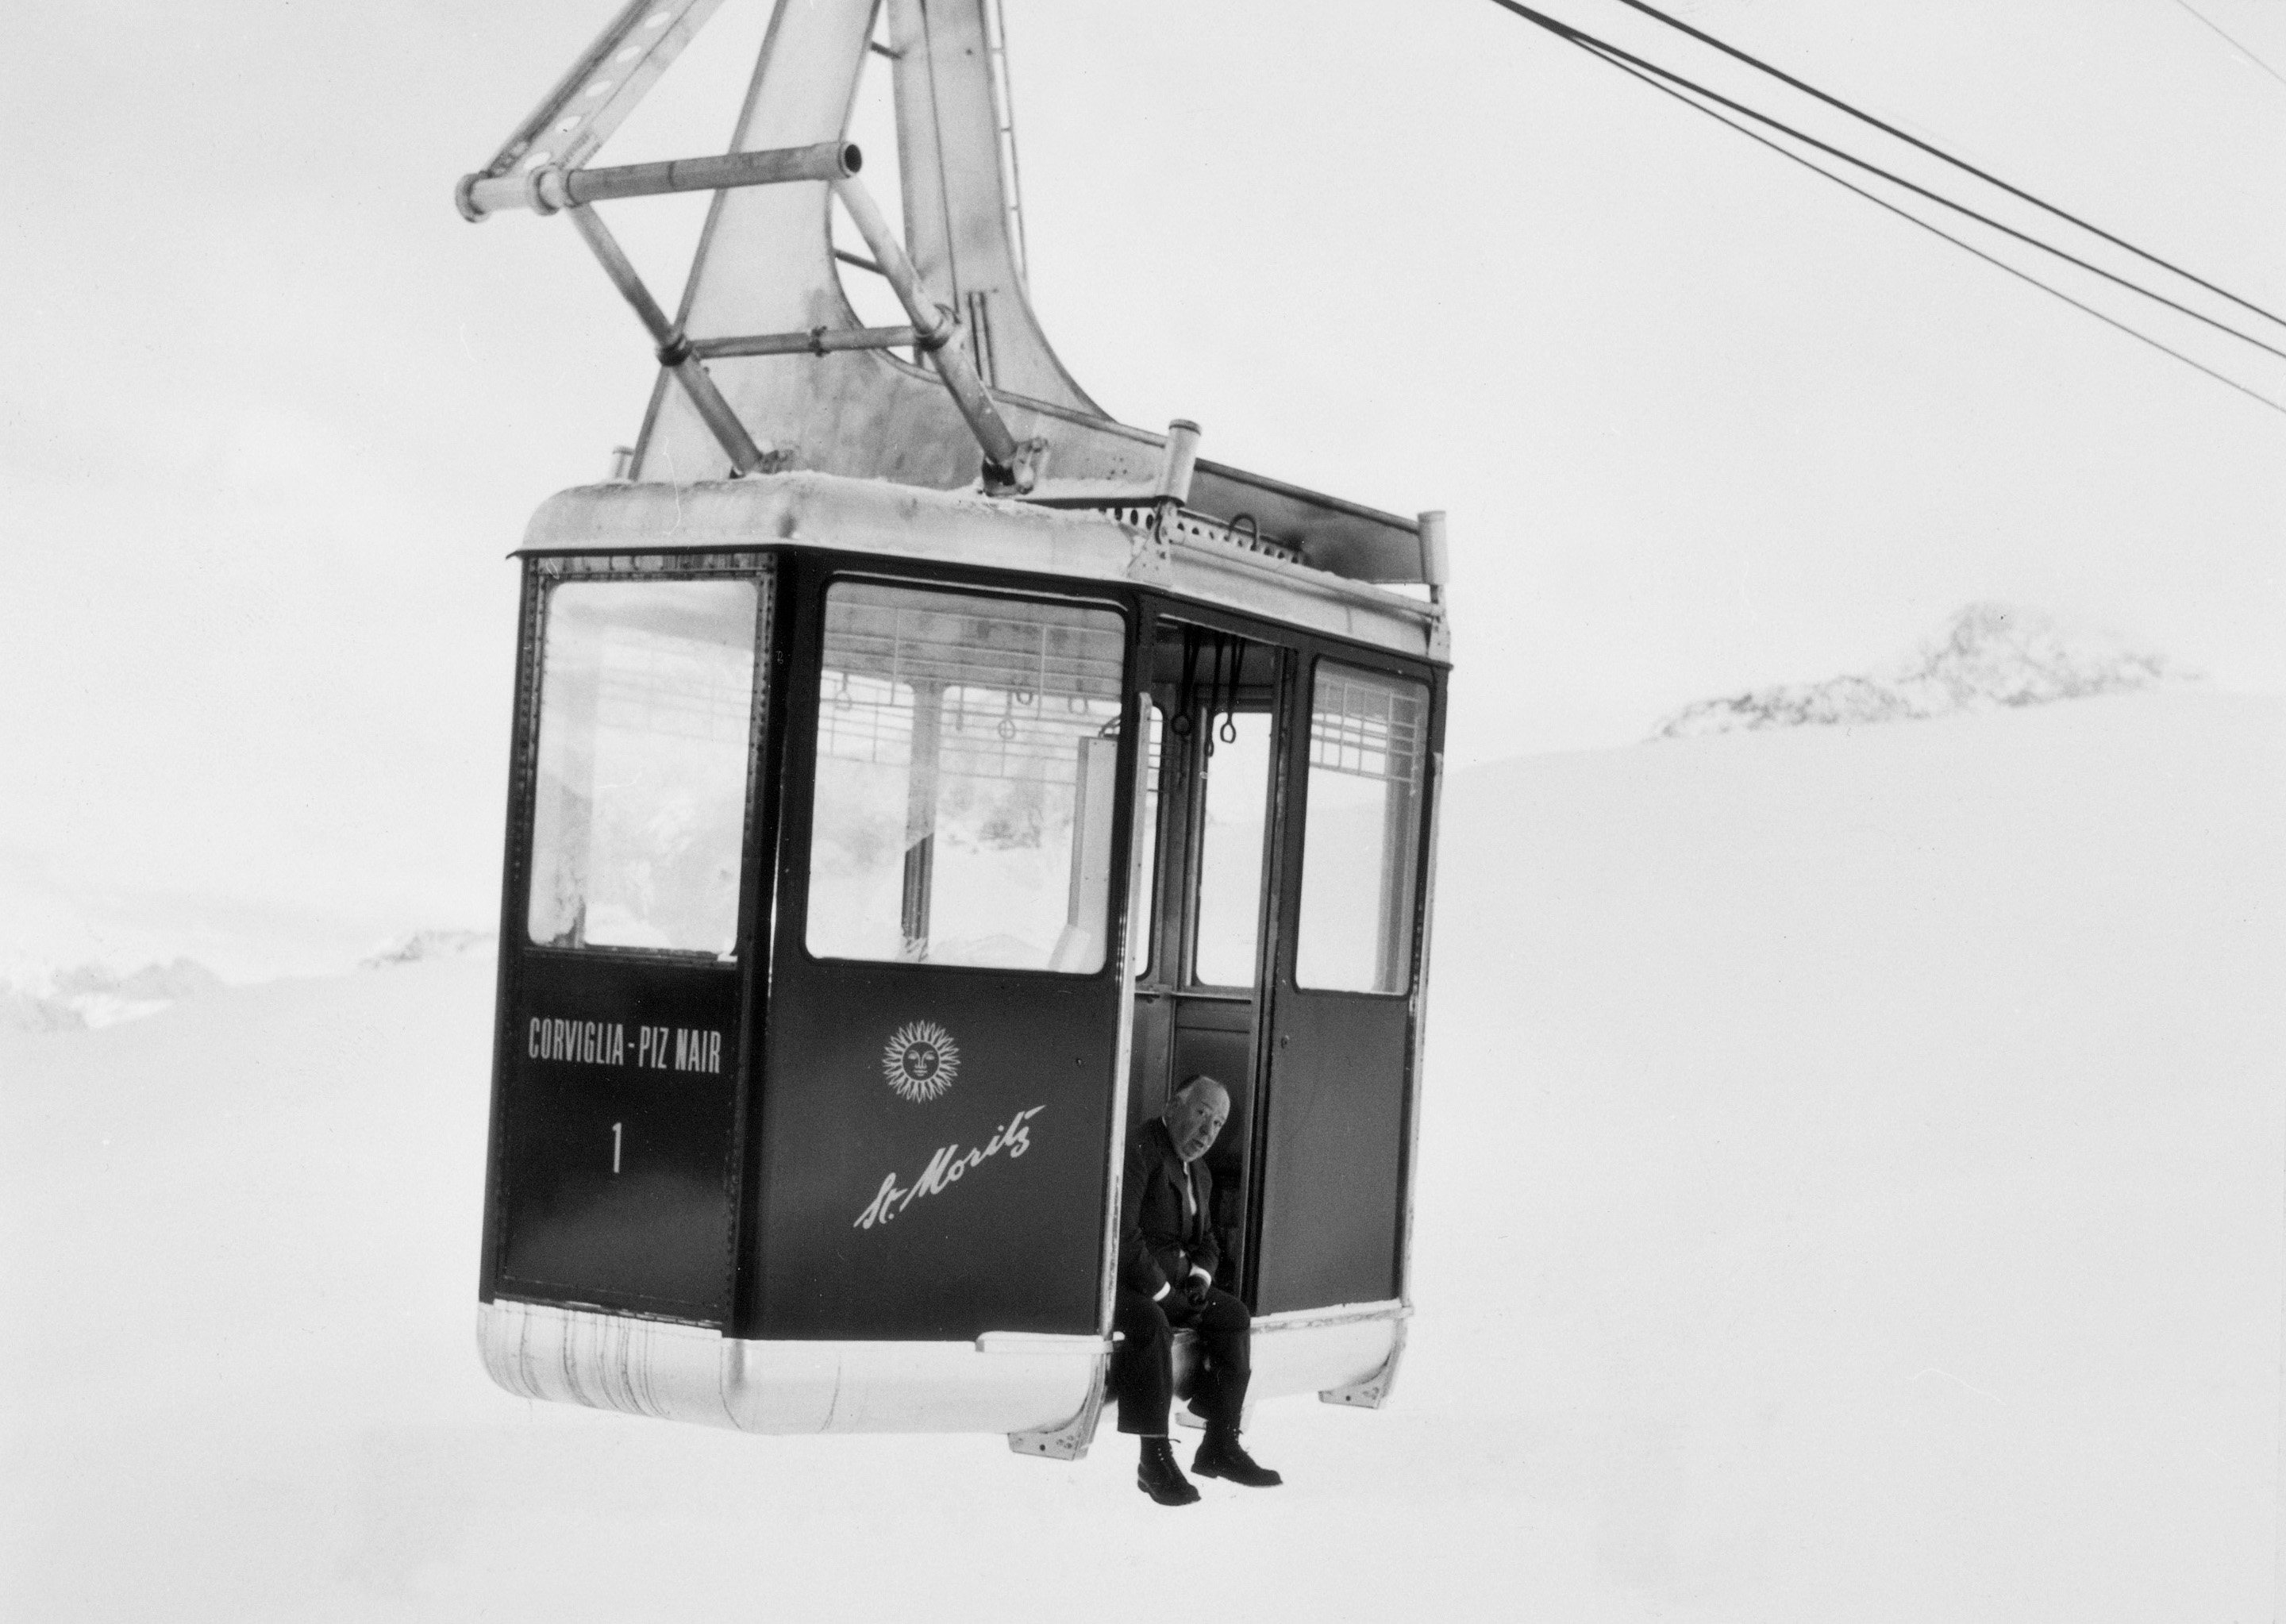 Alfred Hitchcock sitting by the open door of a teleferic, St. Moritz 1967